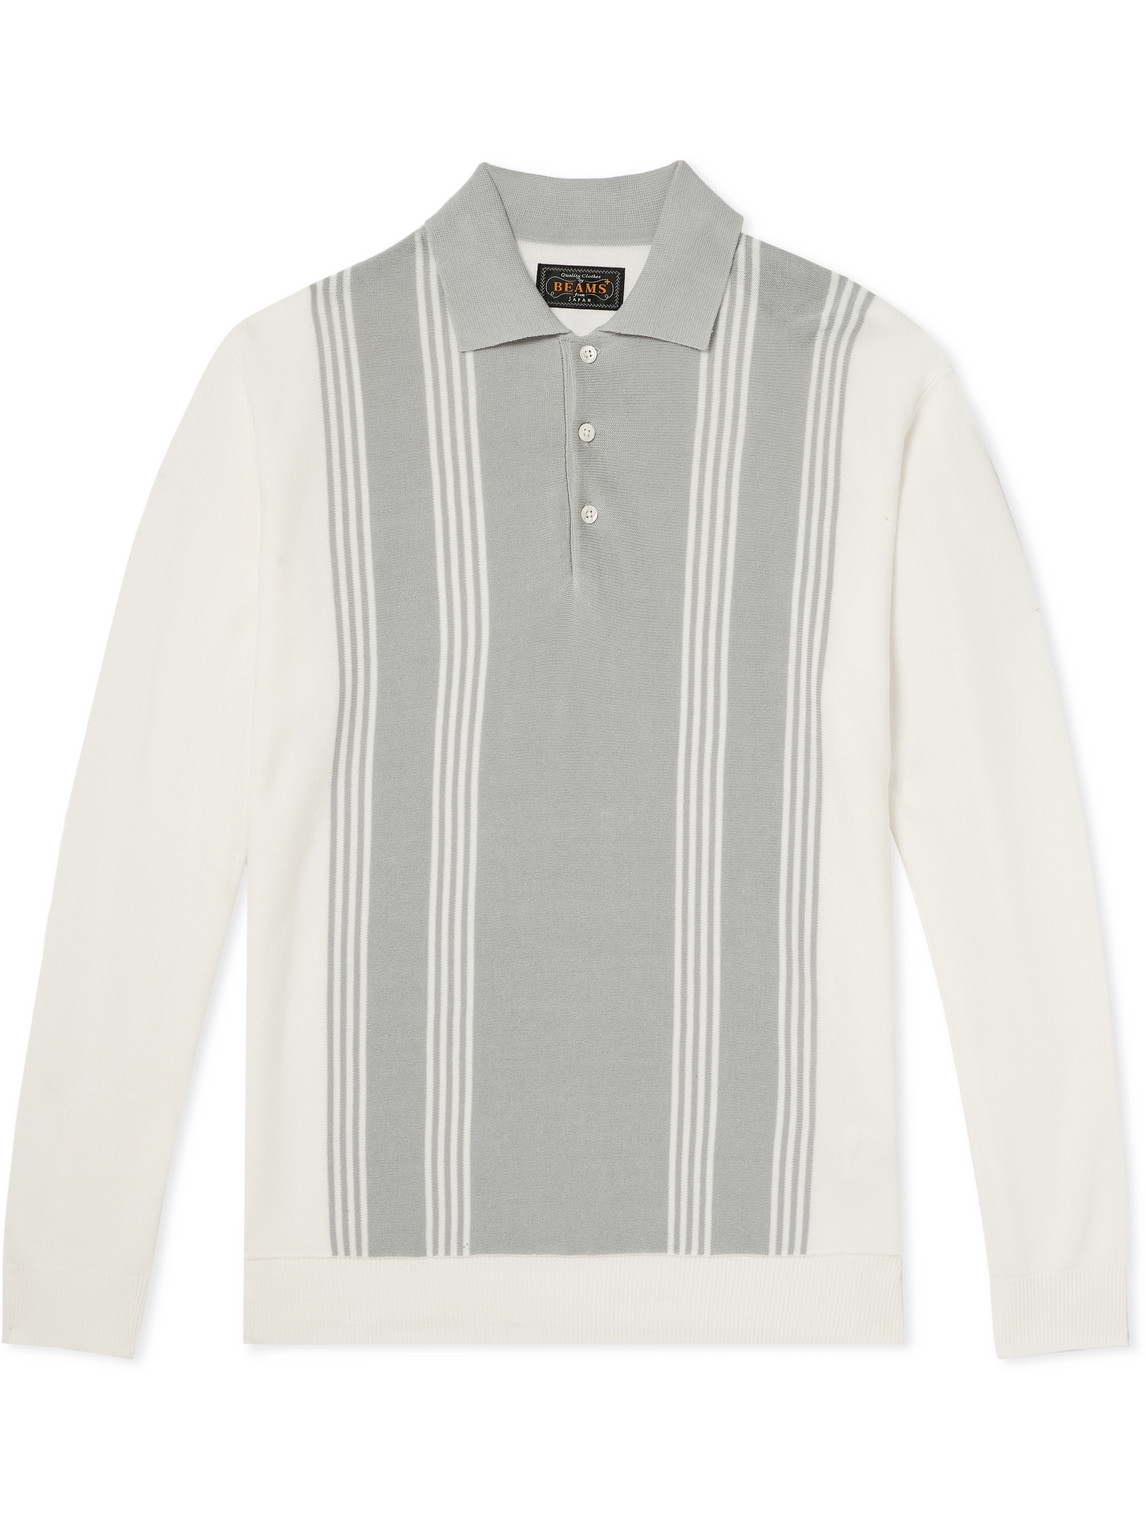 Beams Striped Knitted Polo Shirt In Grey